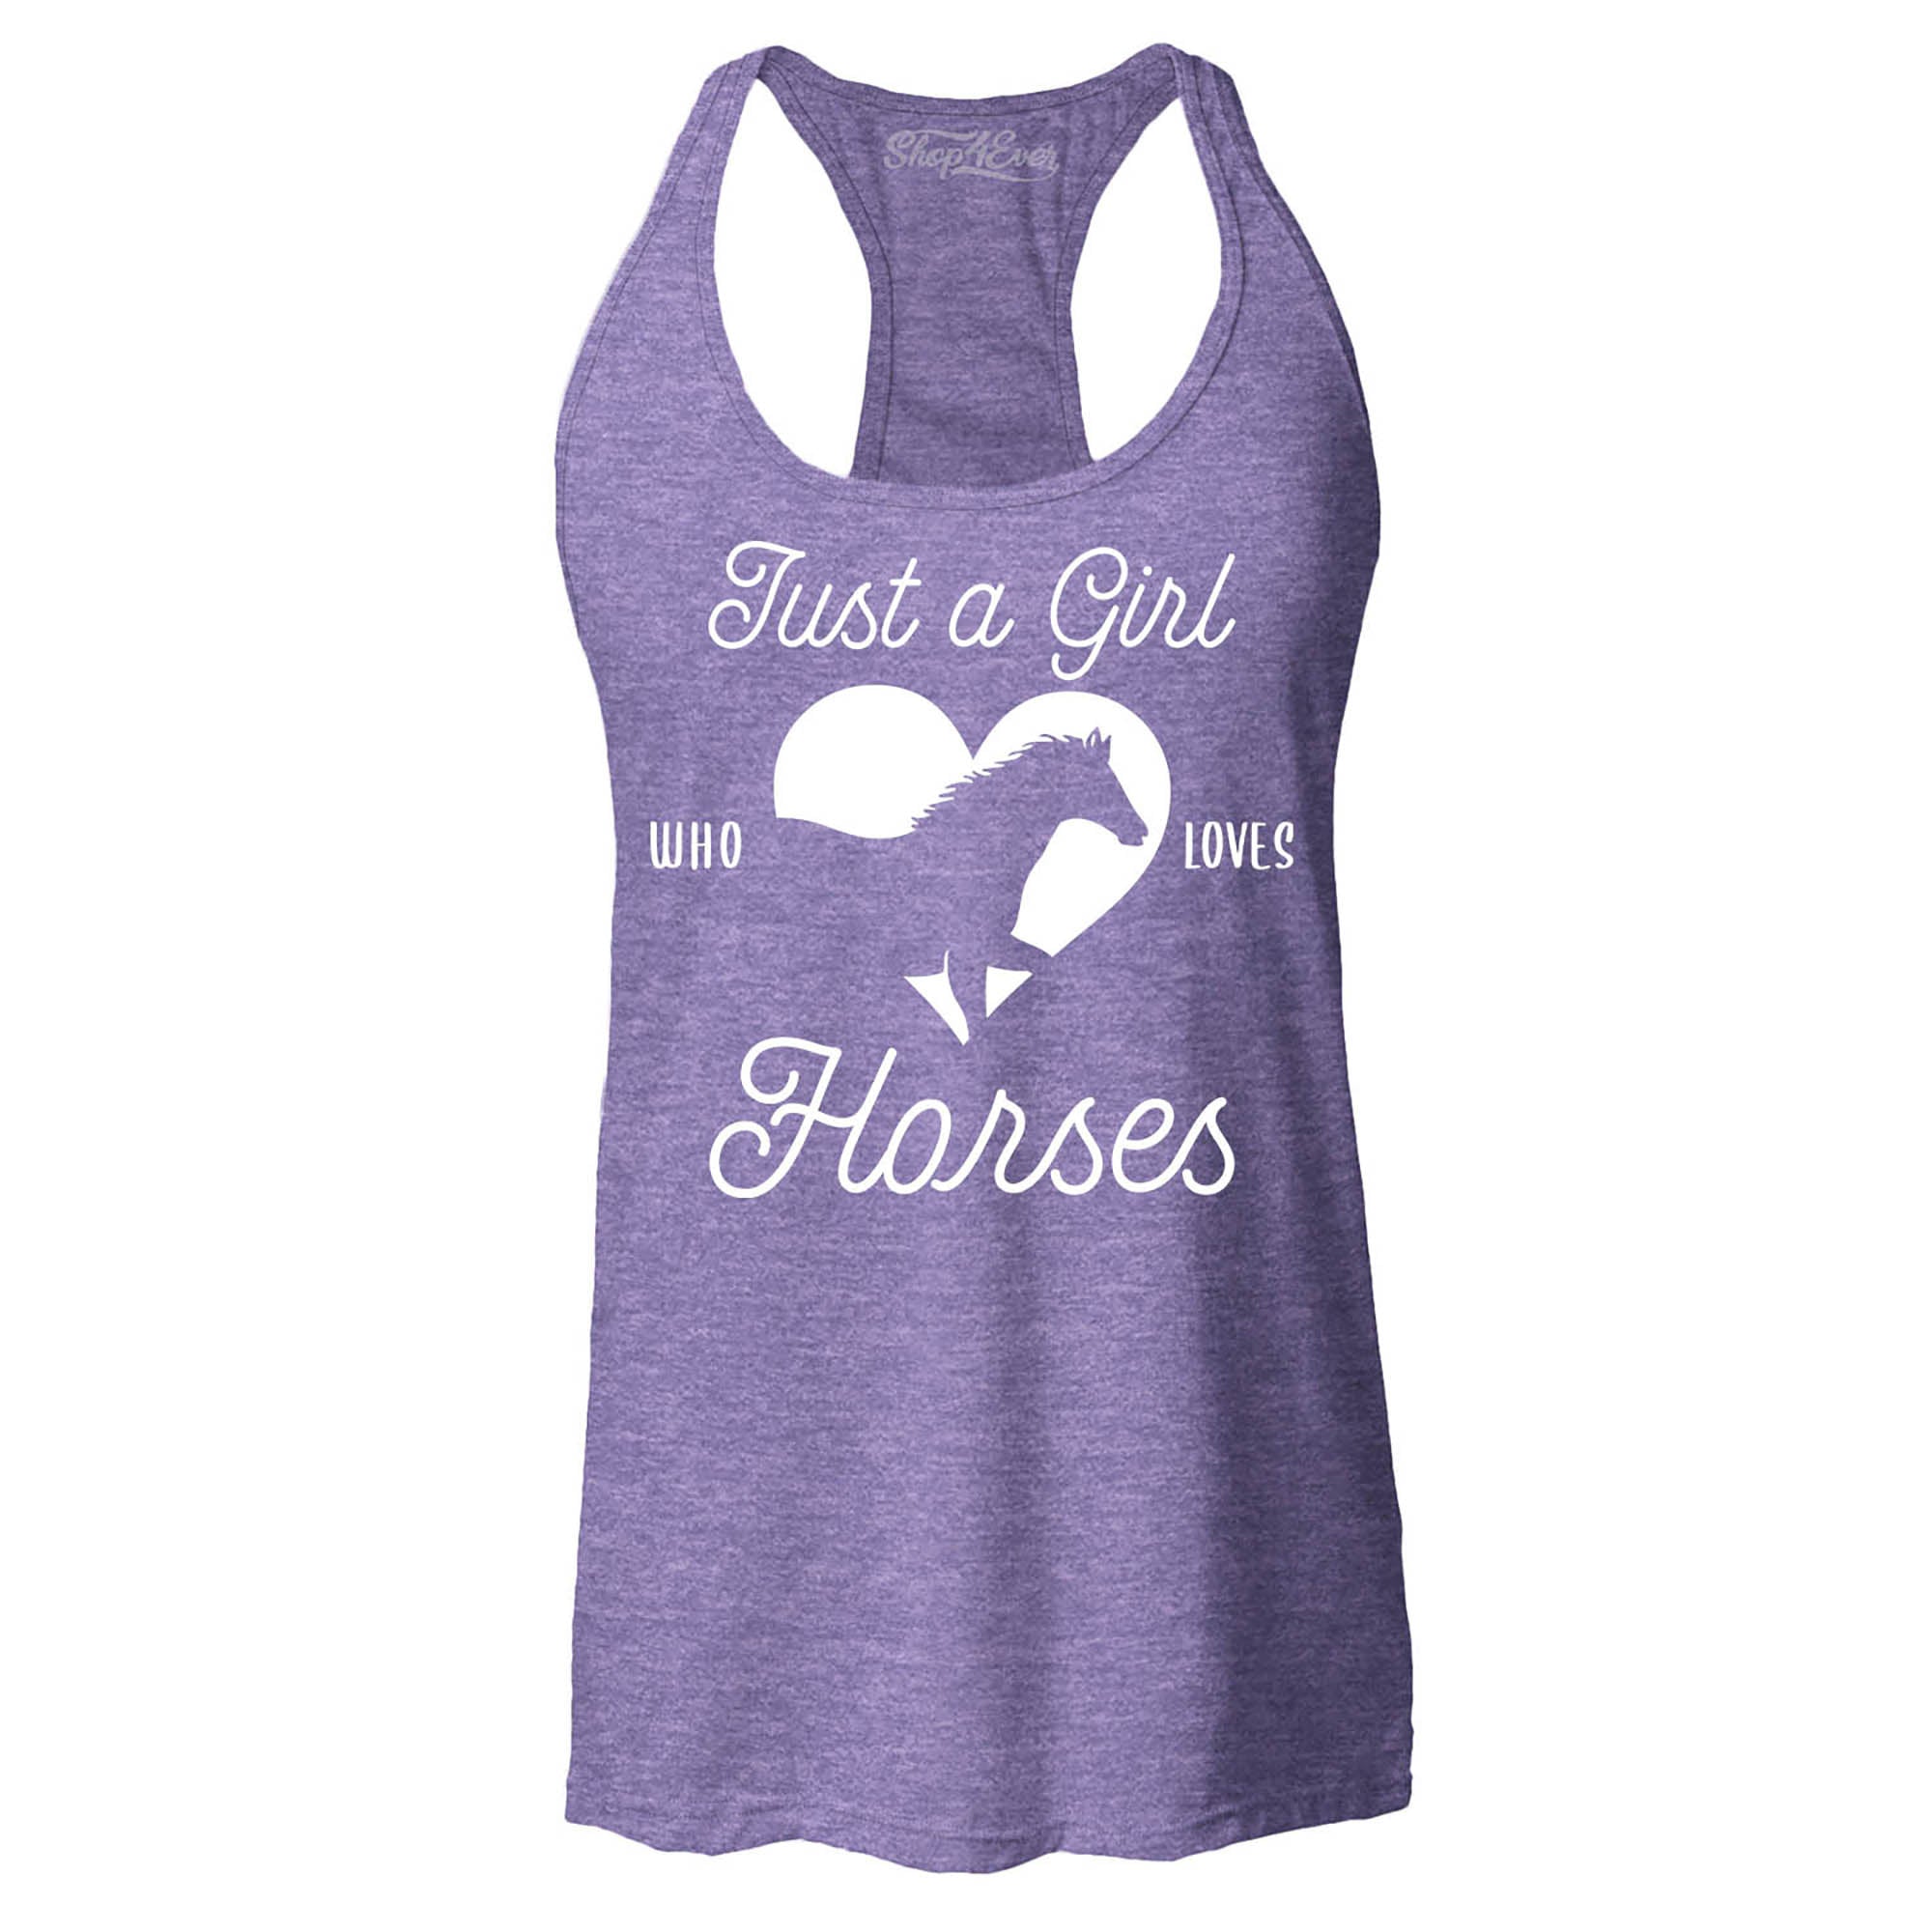 Just A Girl Who Loves Horses Women's Racerback Tank Top Slim Fit